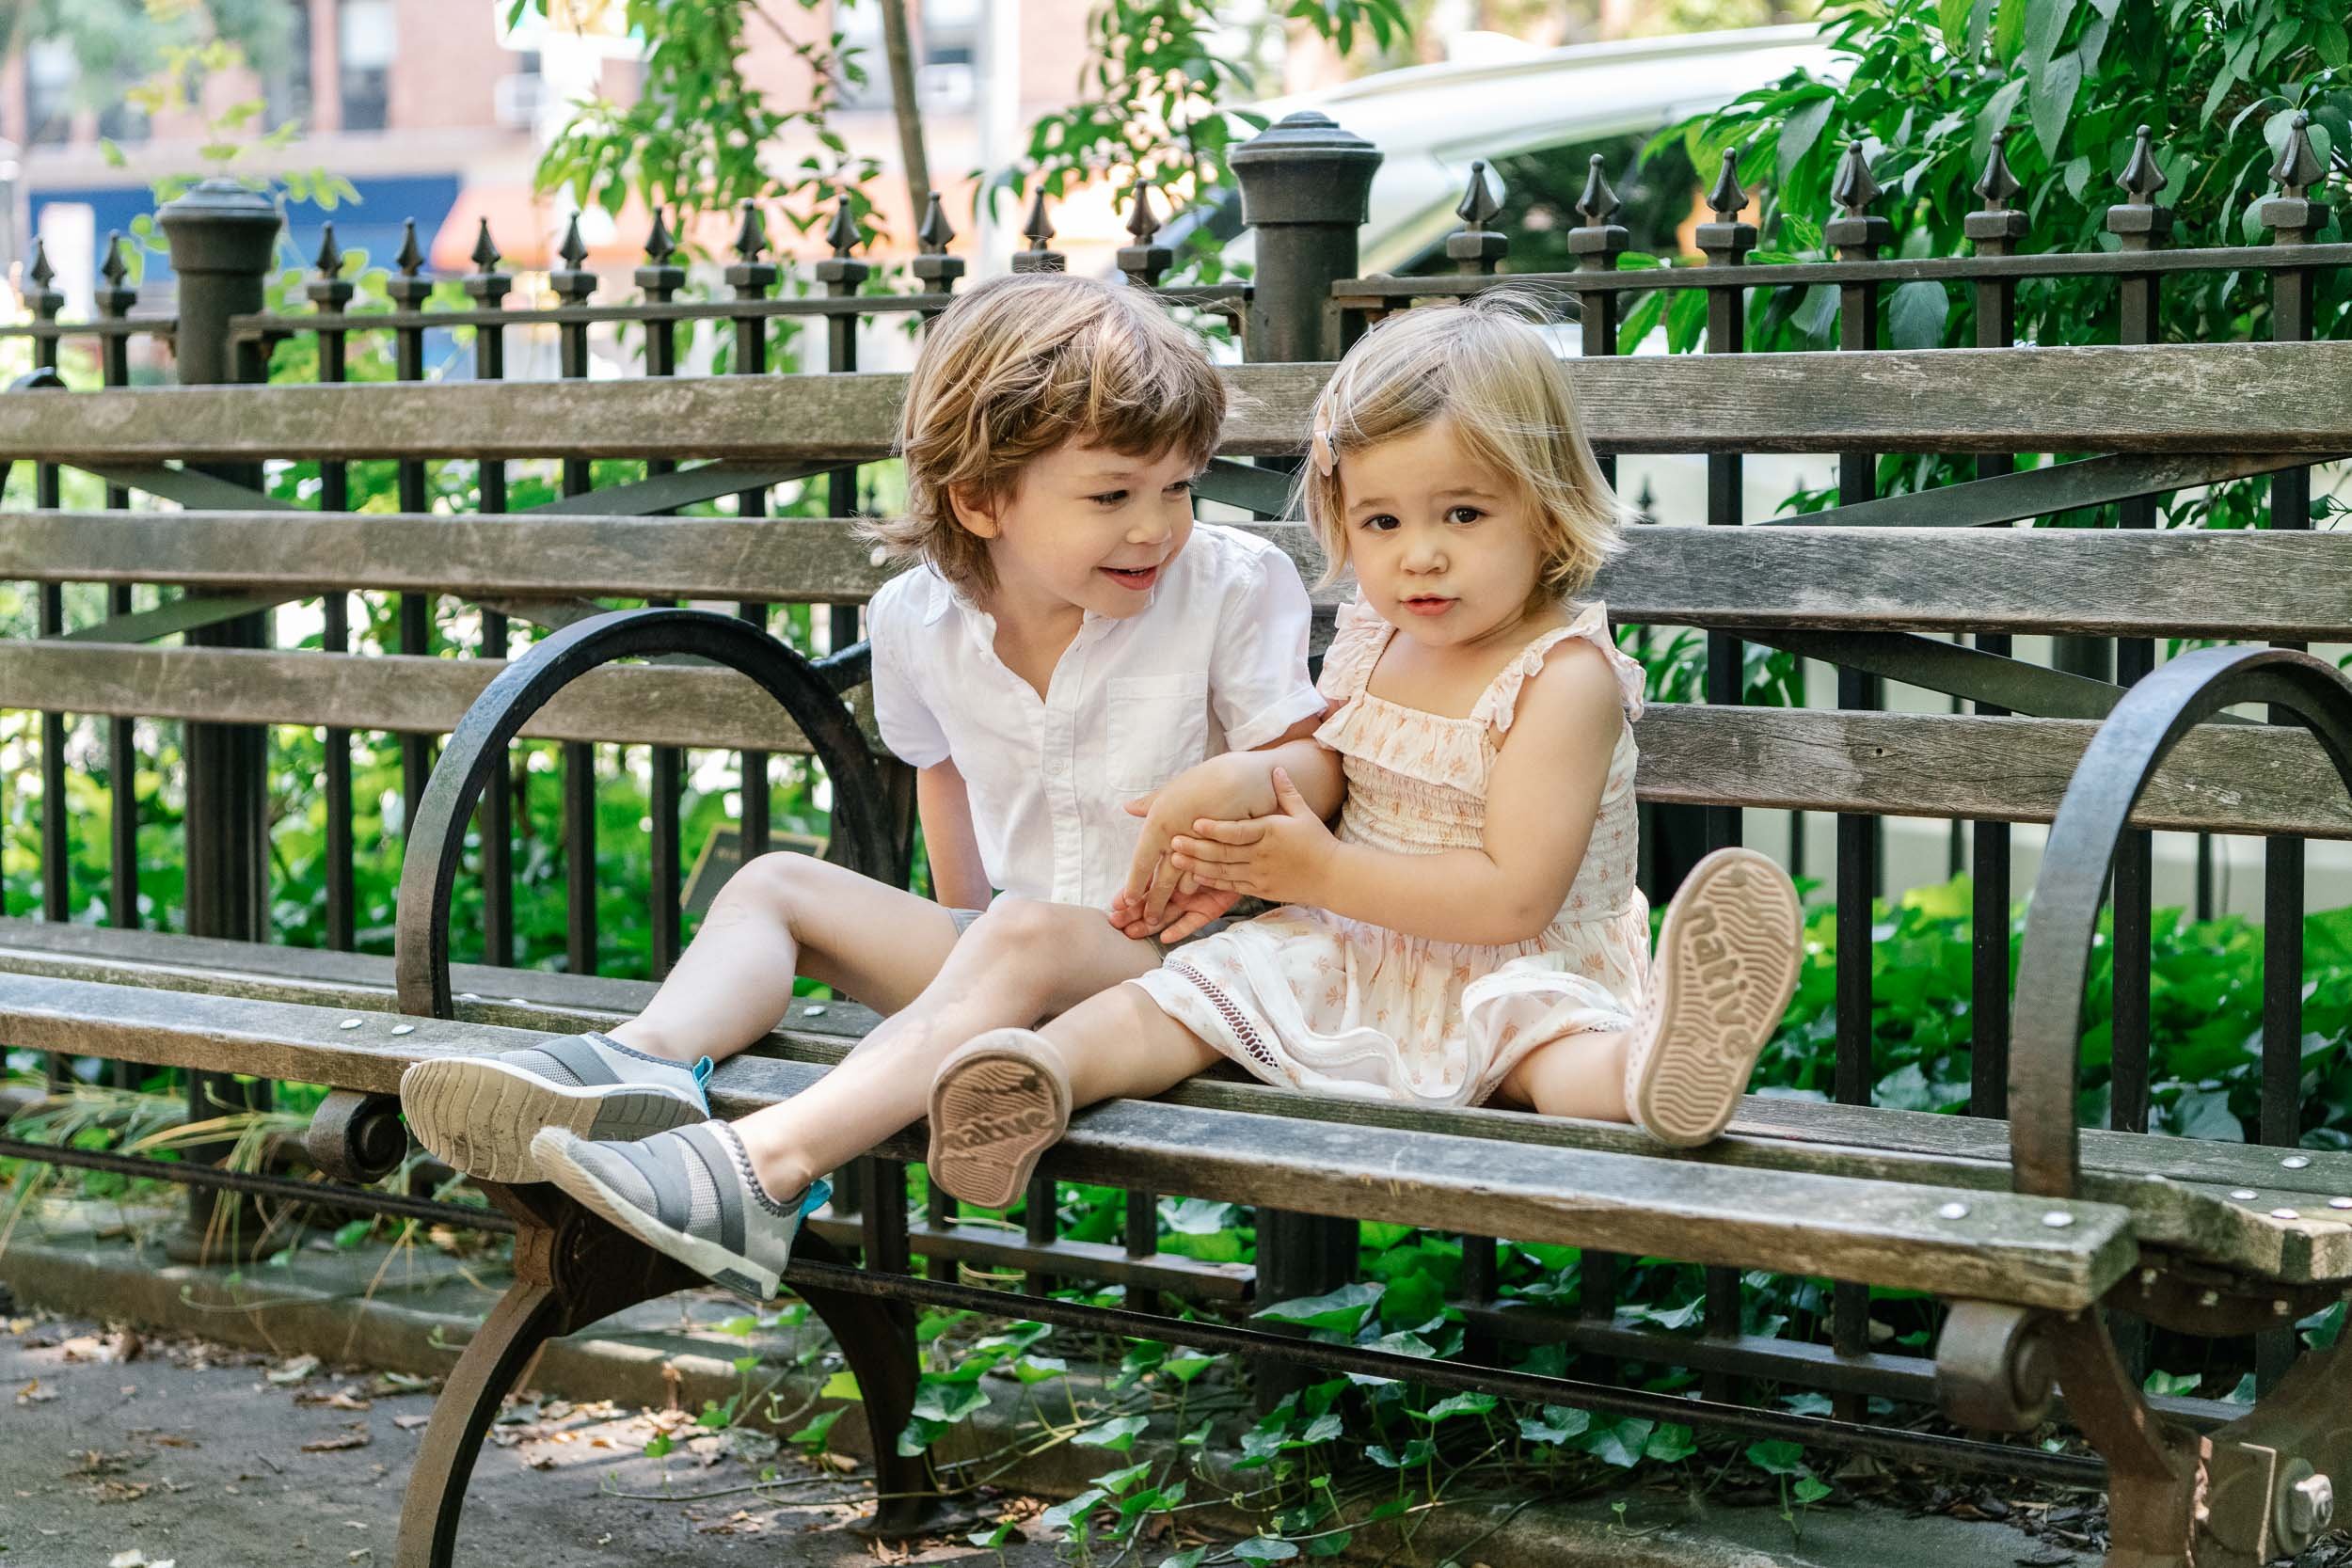  New York City child photography with a boy and girl sitting on a park bench by Nicole Hawkins Photography. park bench #NicoleHawkinsPhotograaphy #NicoleHawkinsChildren #NewYorkPortraits #KidsinNewYork #ChildrensPortraits #lifestyleportraits 